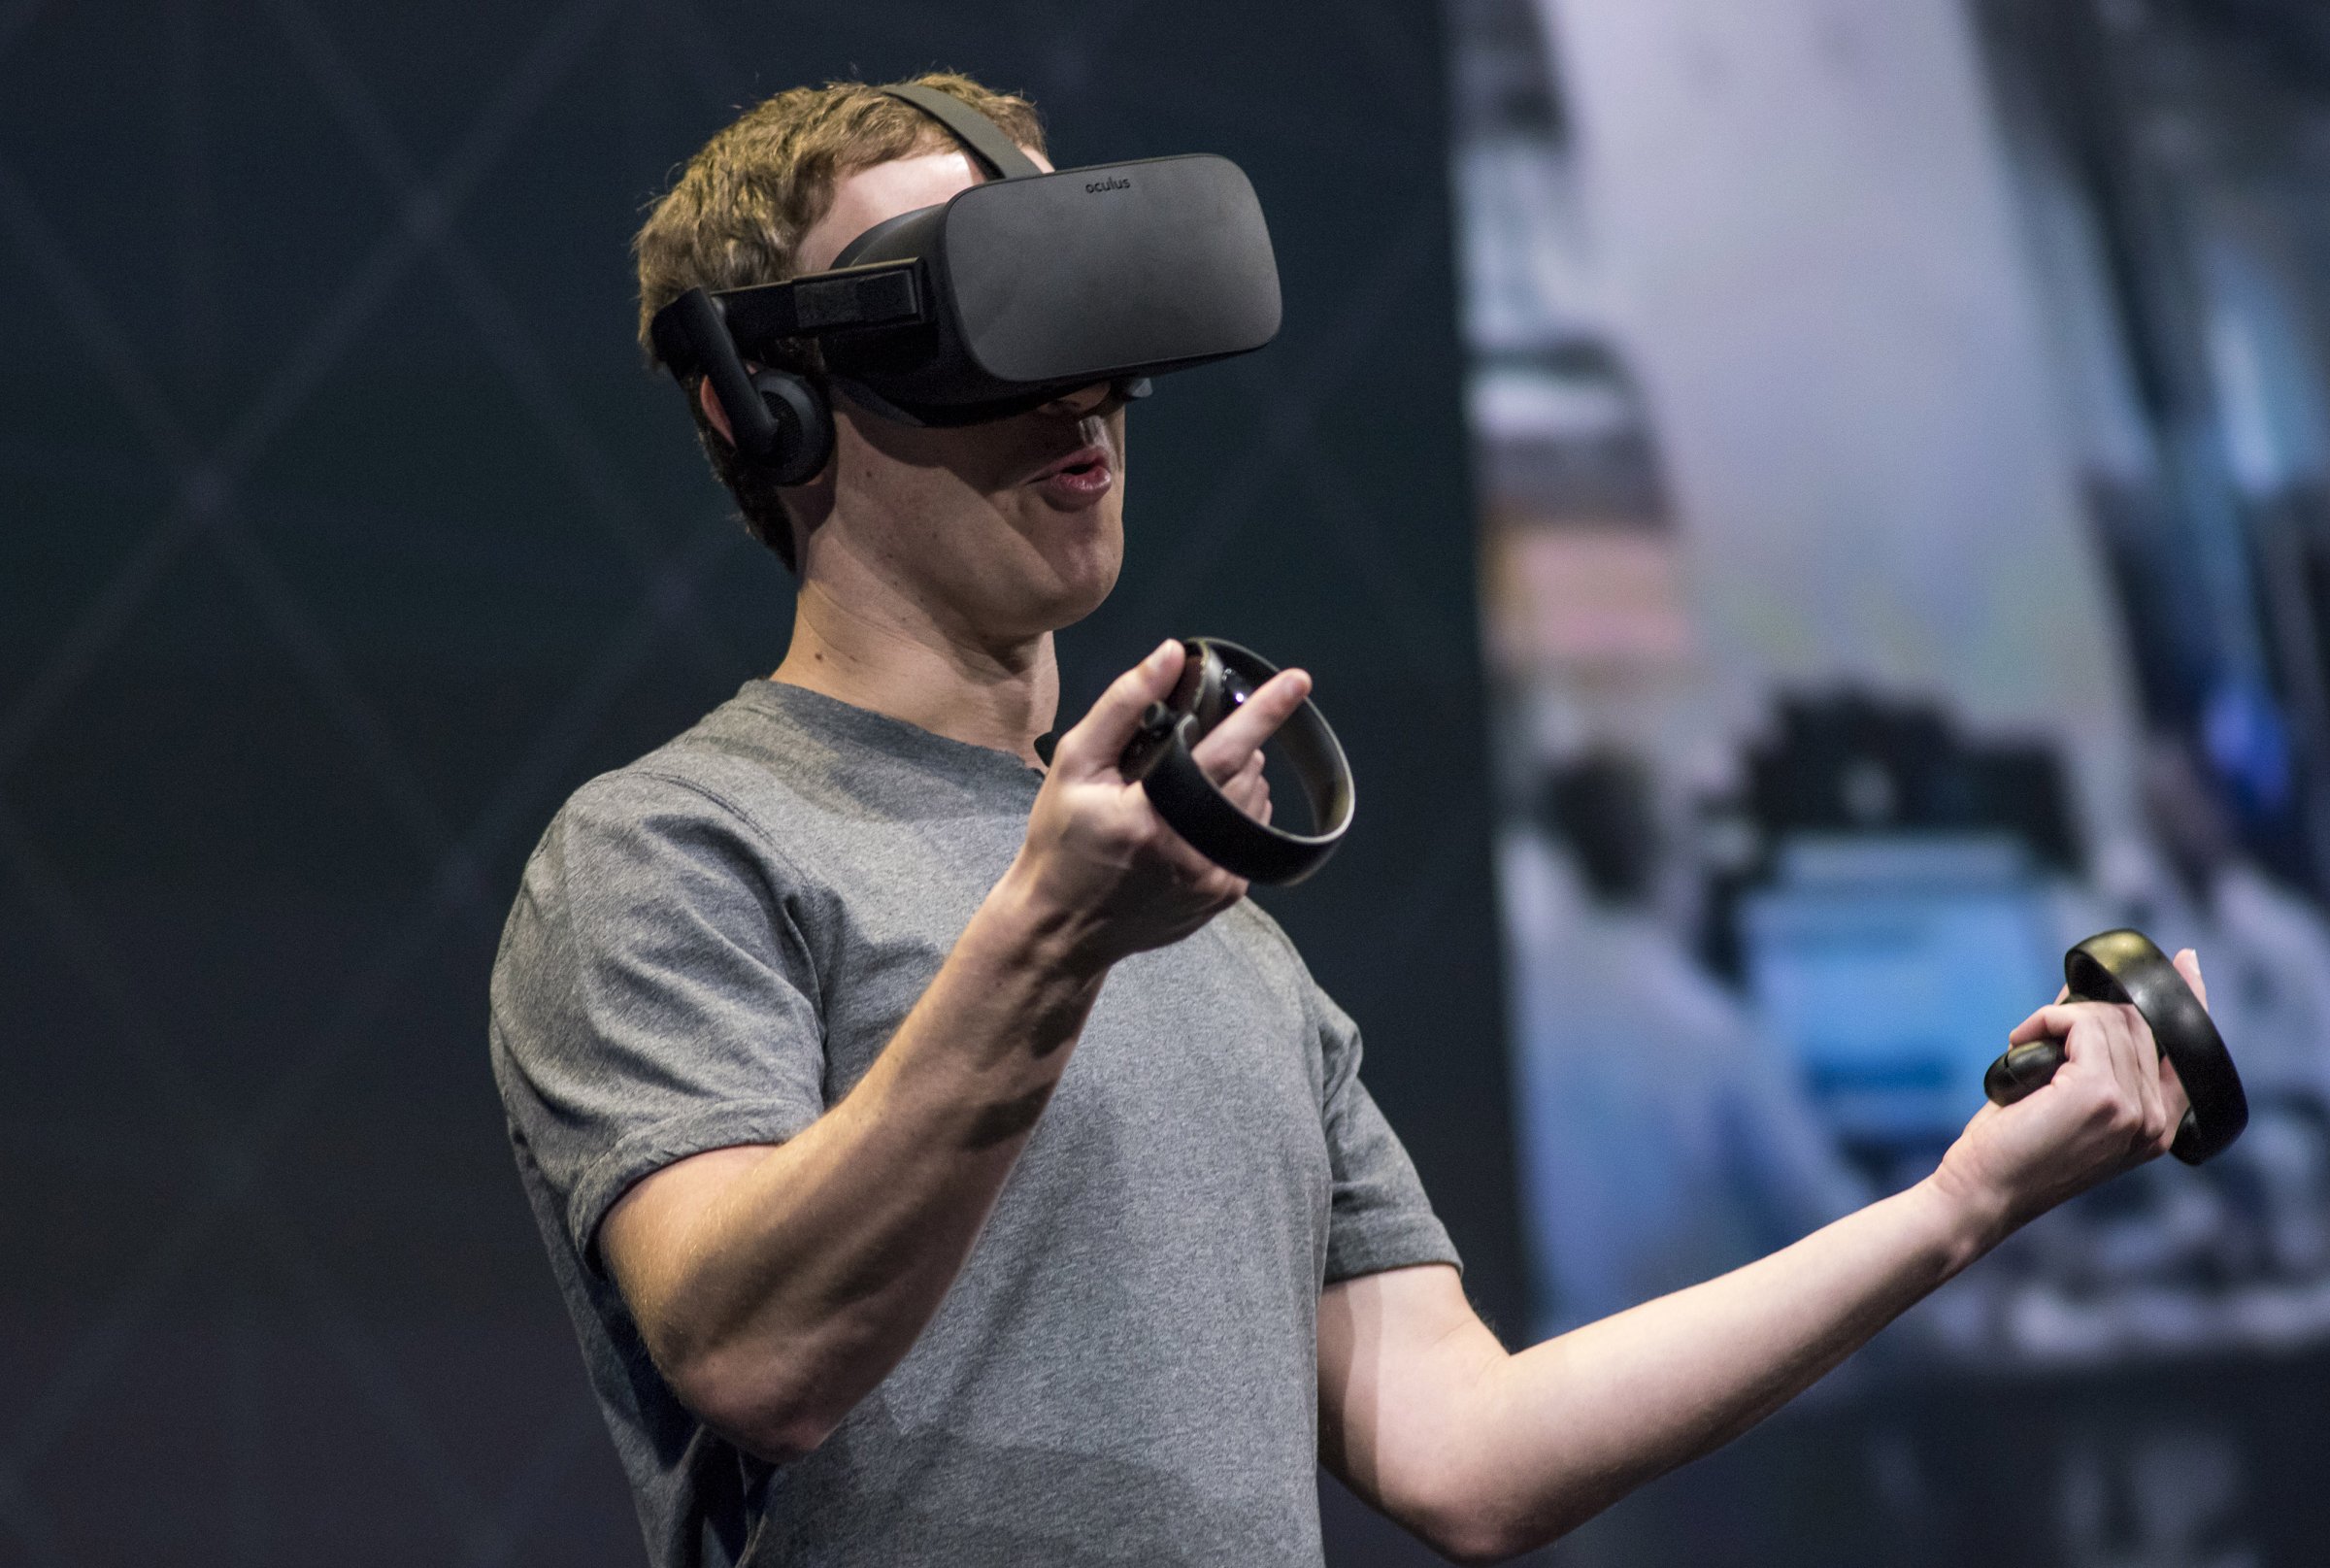 Inside The Oculus Connect 3 Event